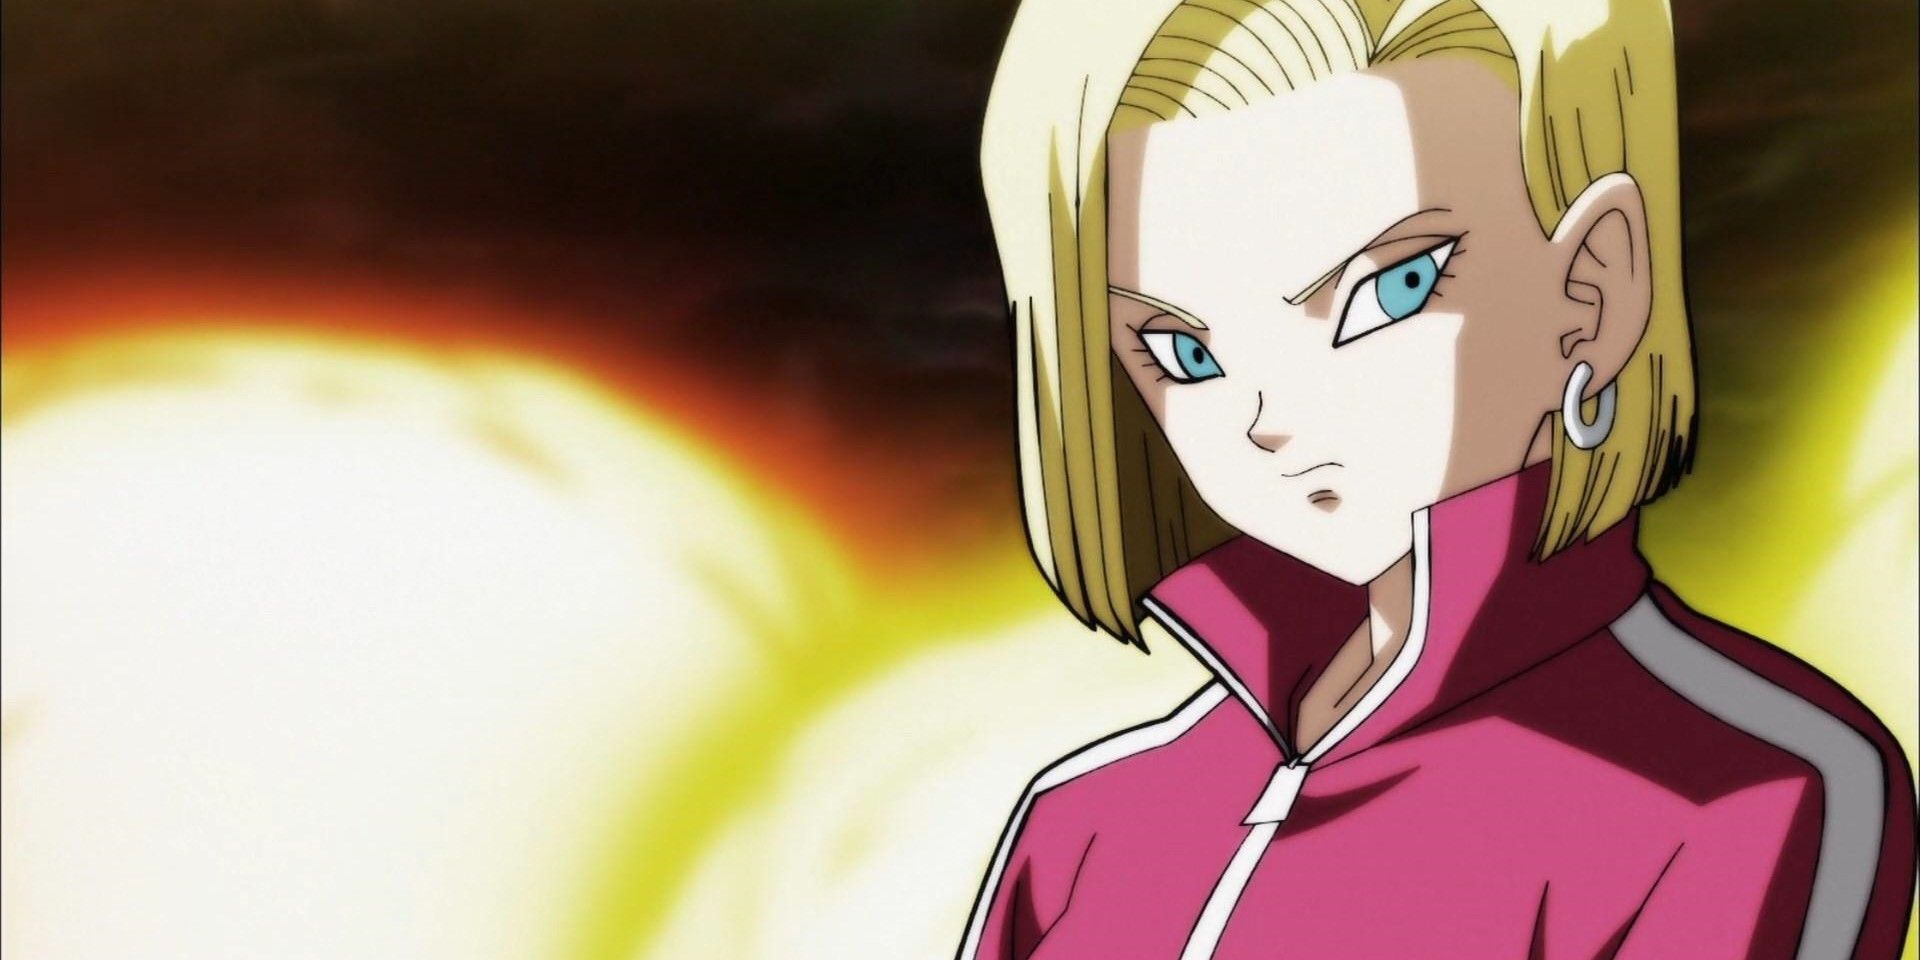 Android 18 prepares for battle in Dragon Ball Super.